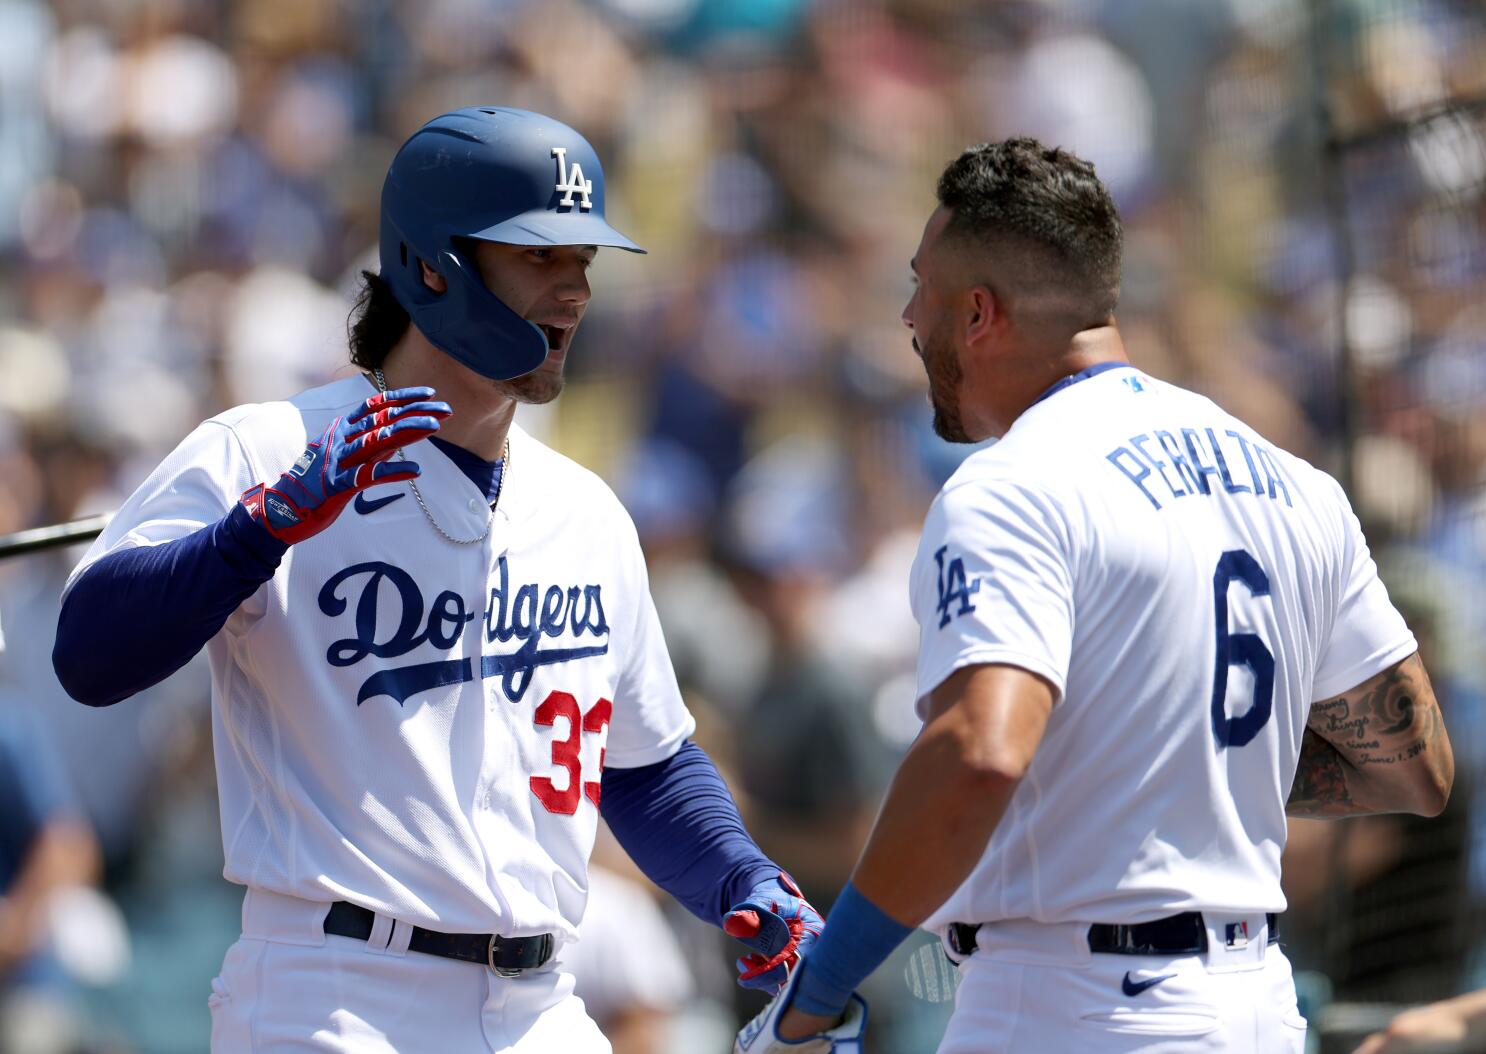 James Outman revives rookie season with grand slam for Dodgers